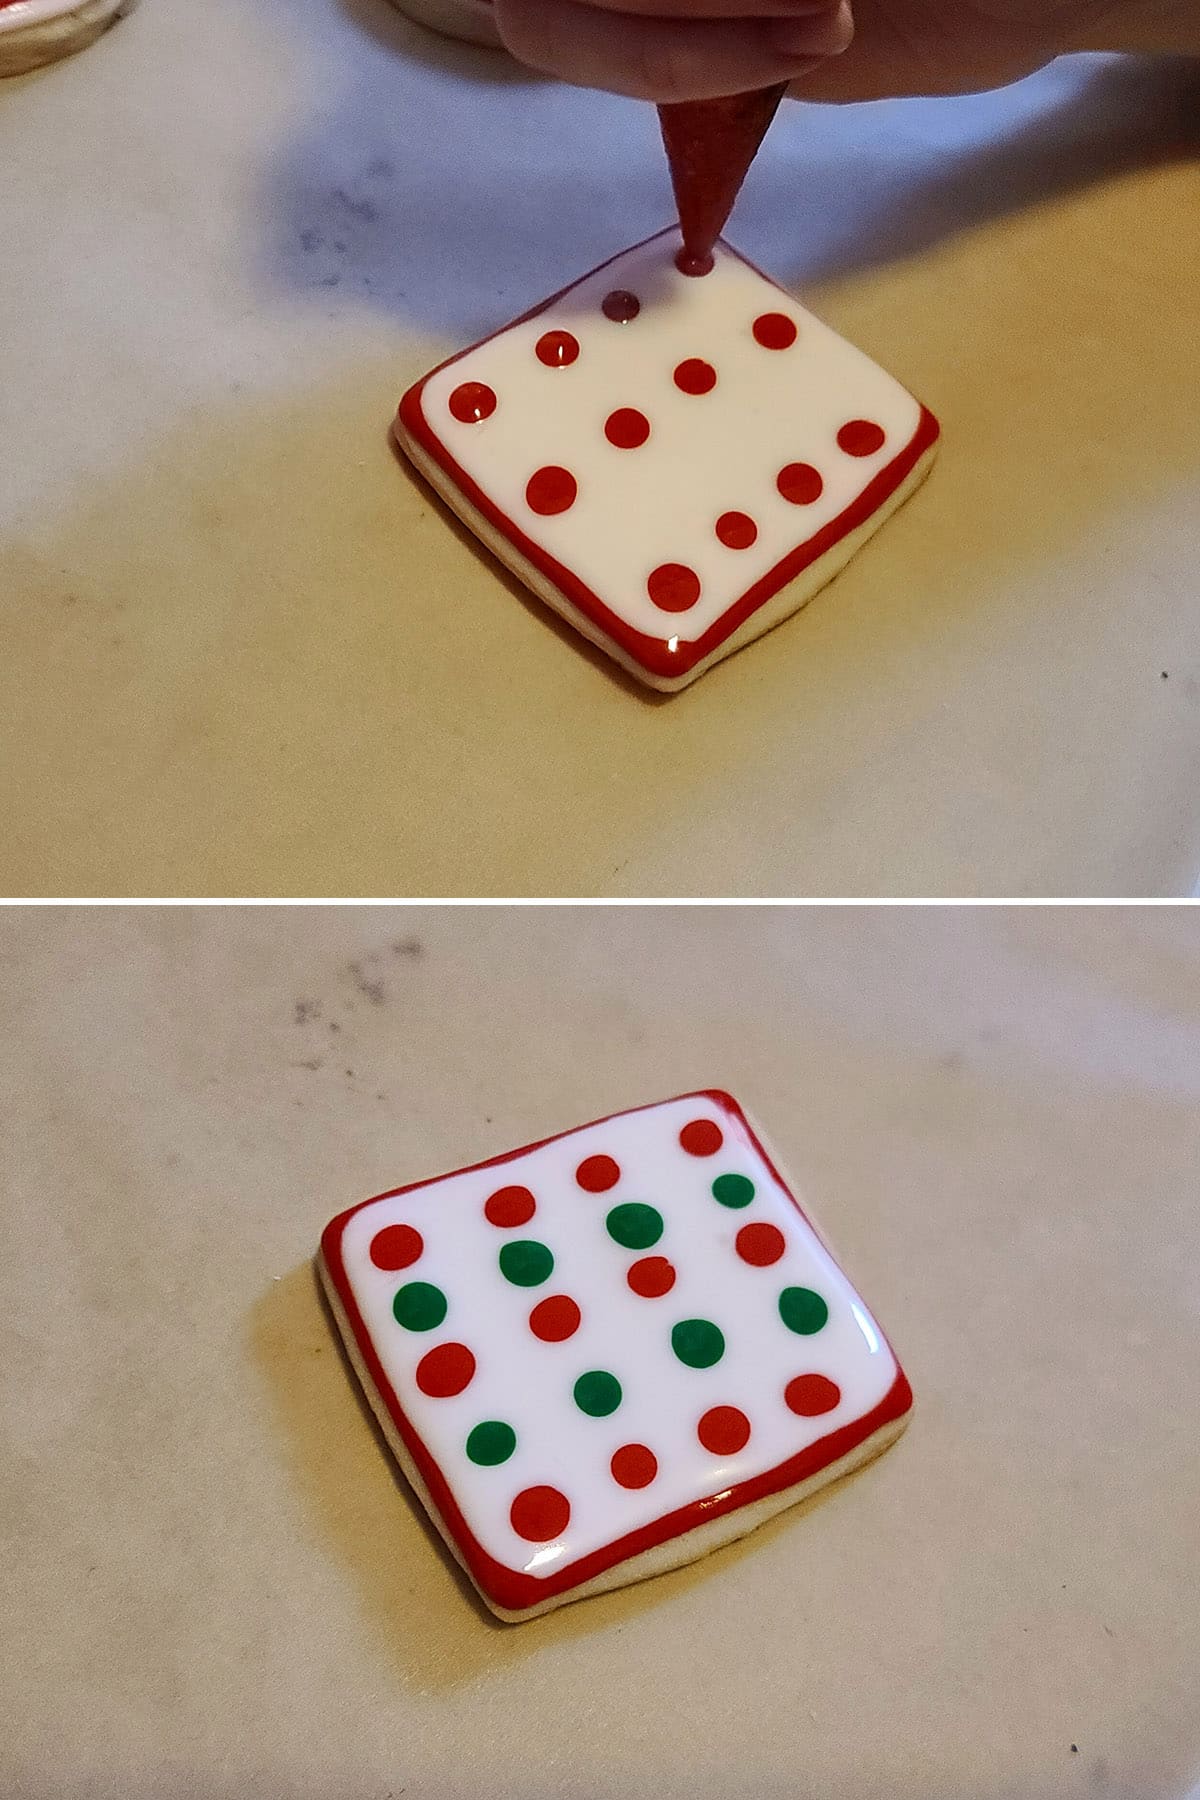 A two part image showing red and green dots piped on white cookies.